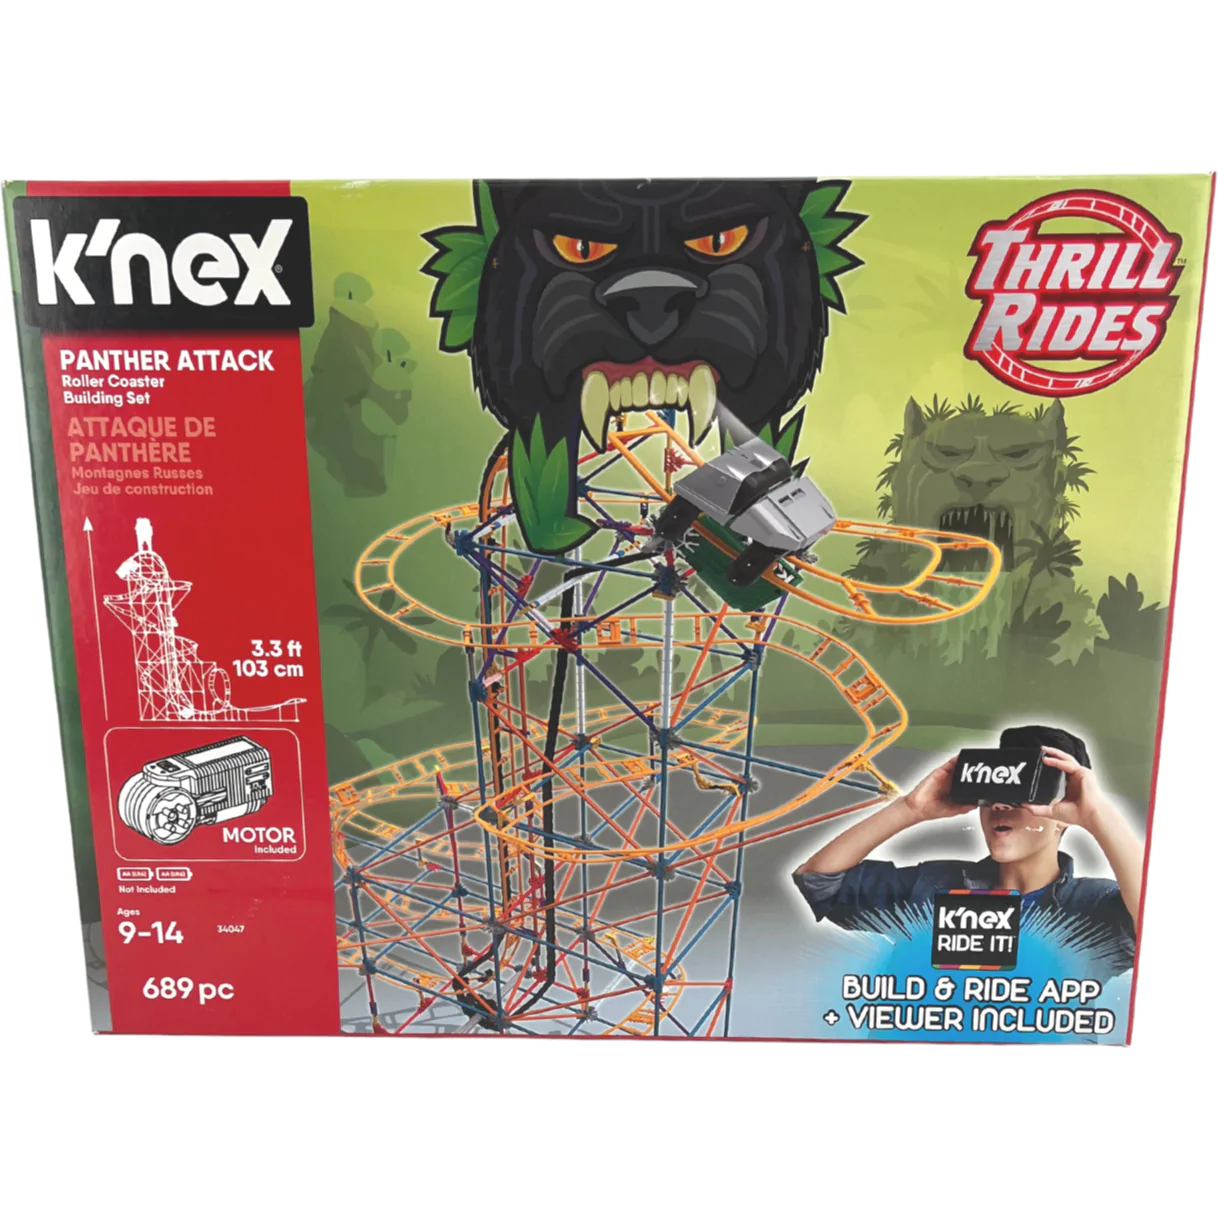 K'nex Thrill Rides Panther Attack Roller Coaster Building Set / 689 Pieces / Ages 9-14